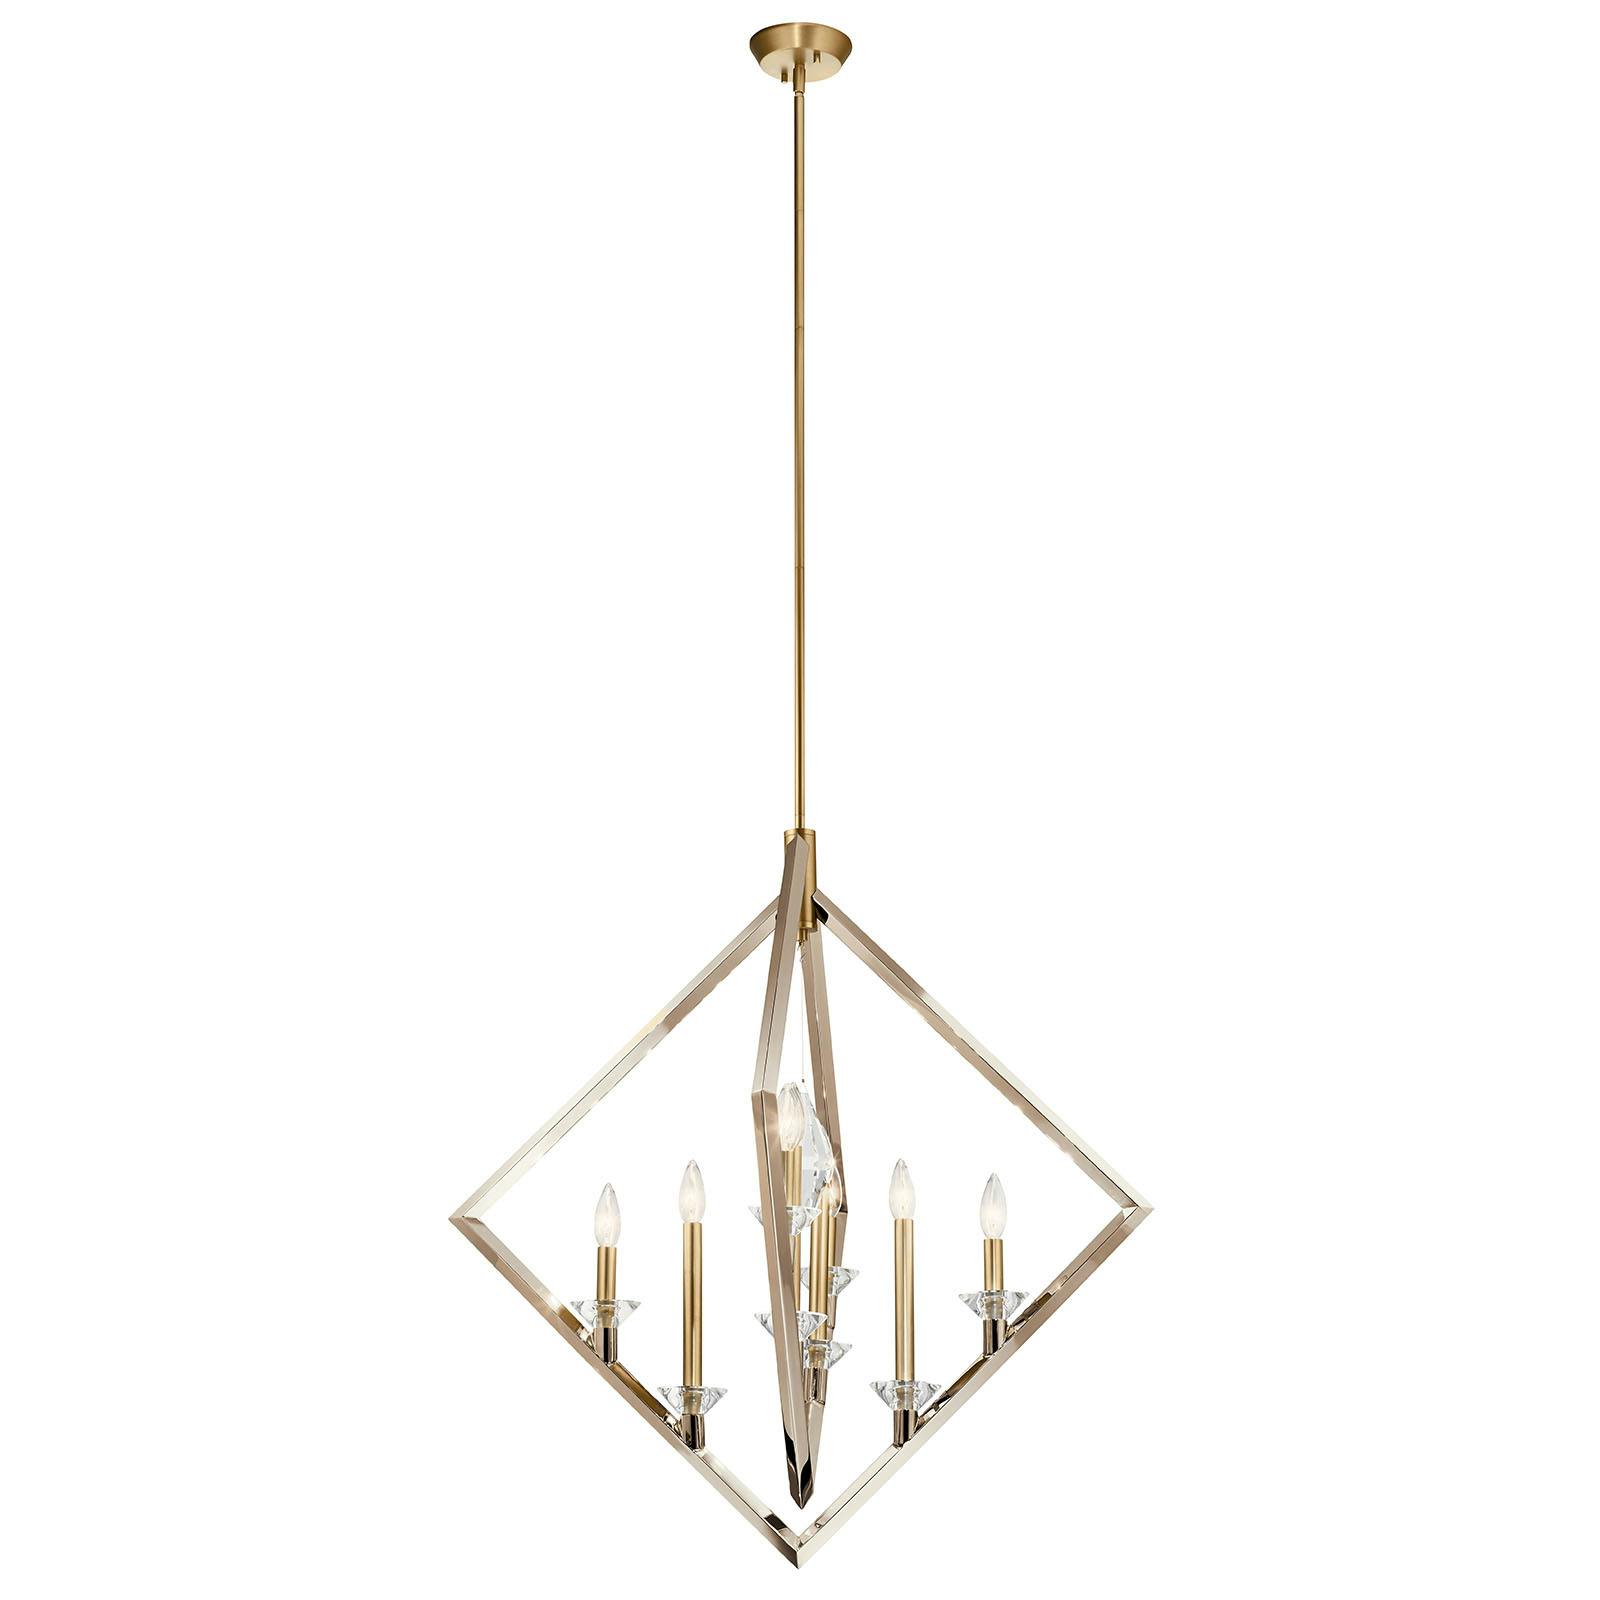 Profile view of the Layan 8 Light Foyer Pendant Nickel on a white background